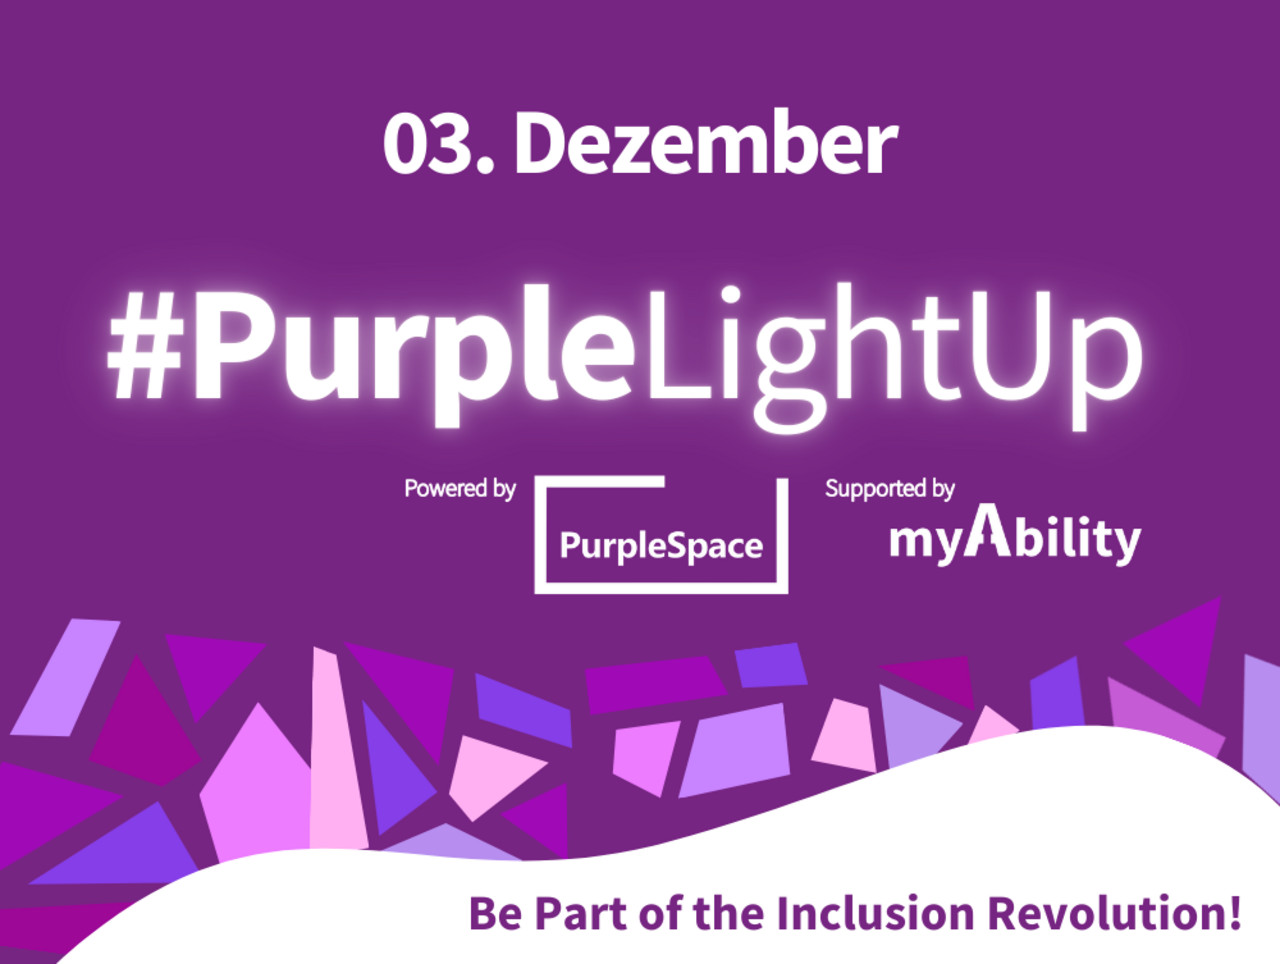 3 December #PurpleLightUp, powered by PurpleSpace, supported by myAbility. Purple background